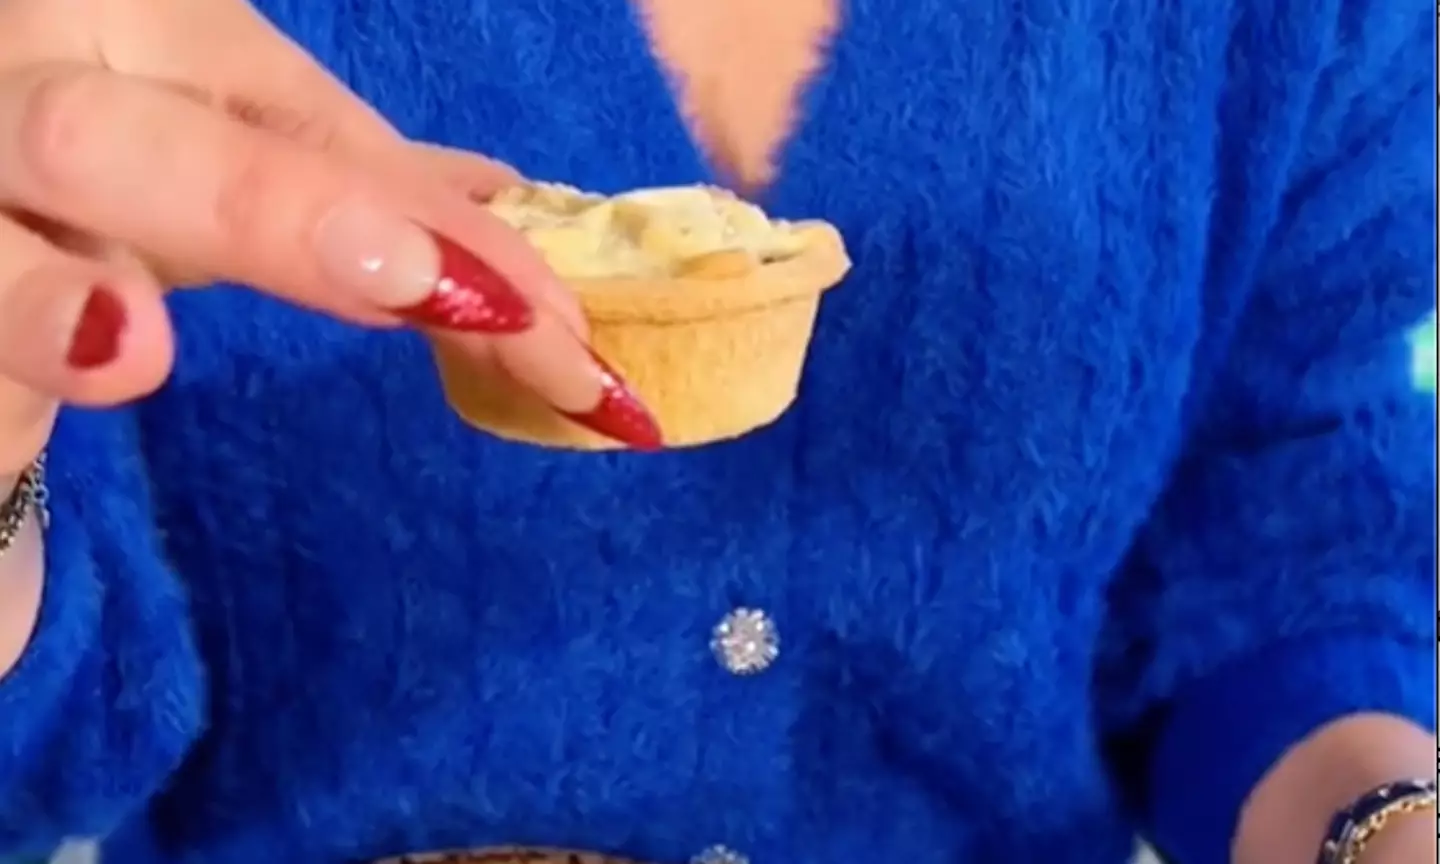 The mince pie should be lifted with your thumb and forefinger.